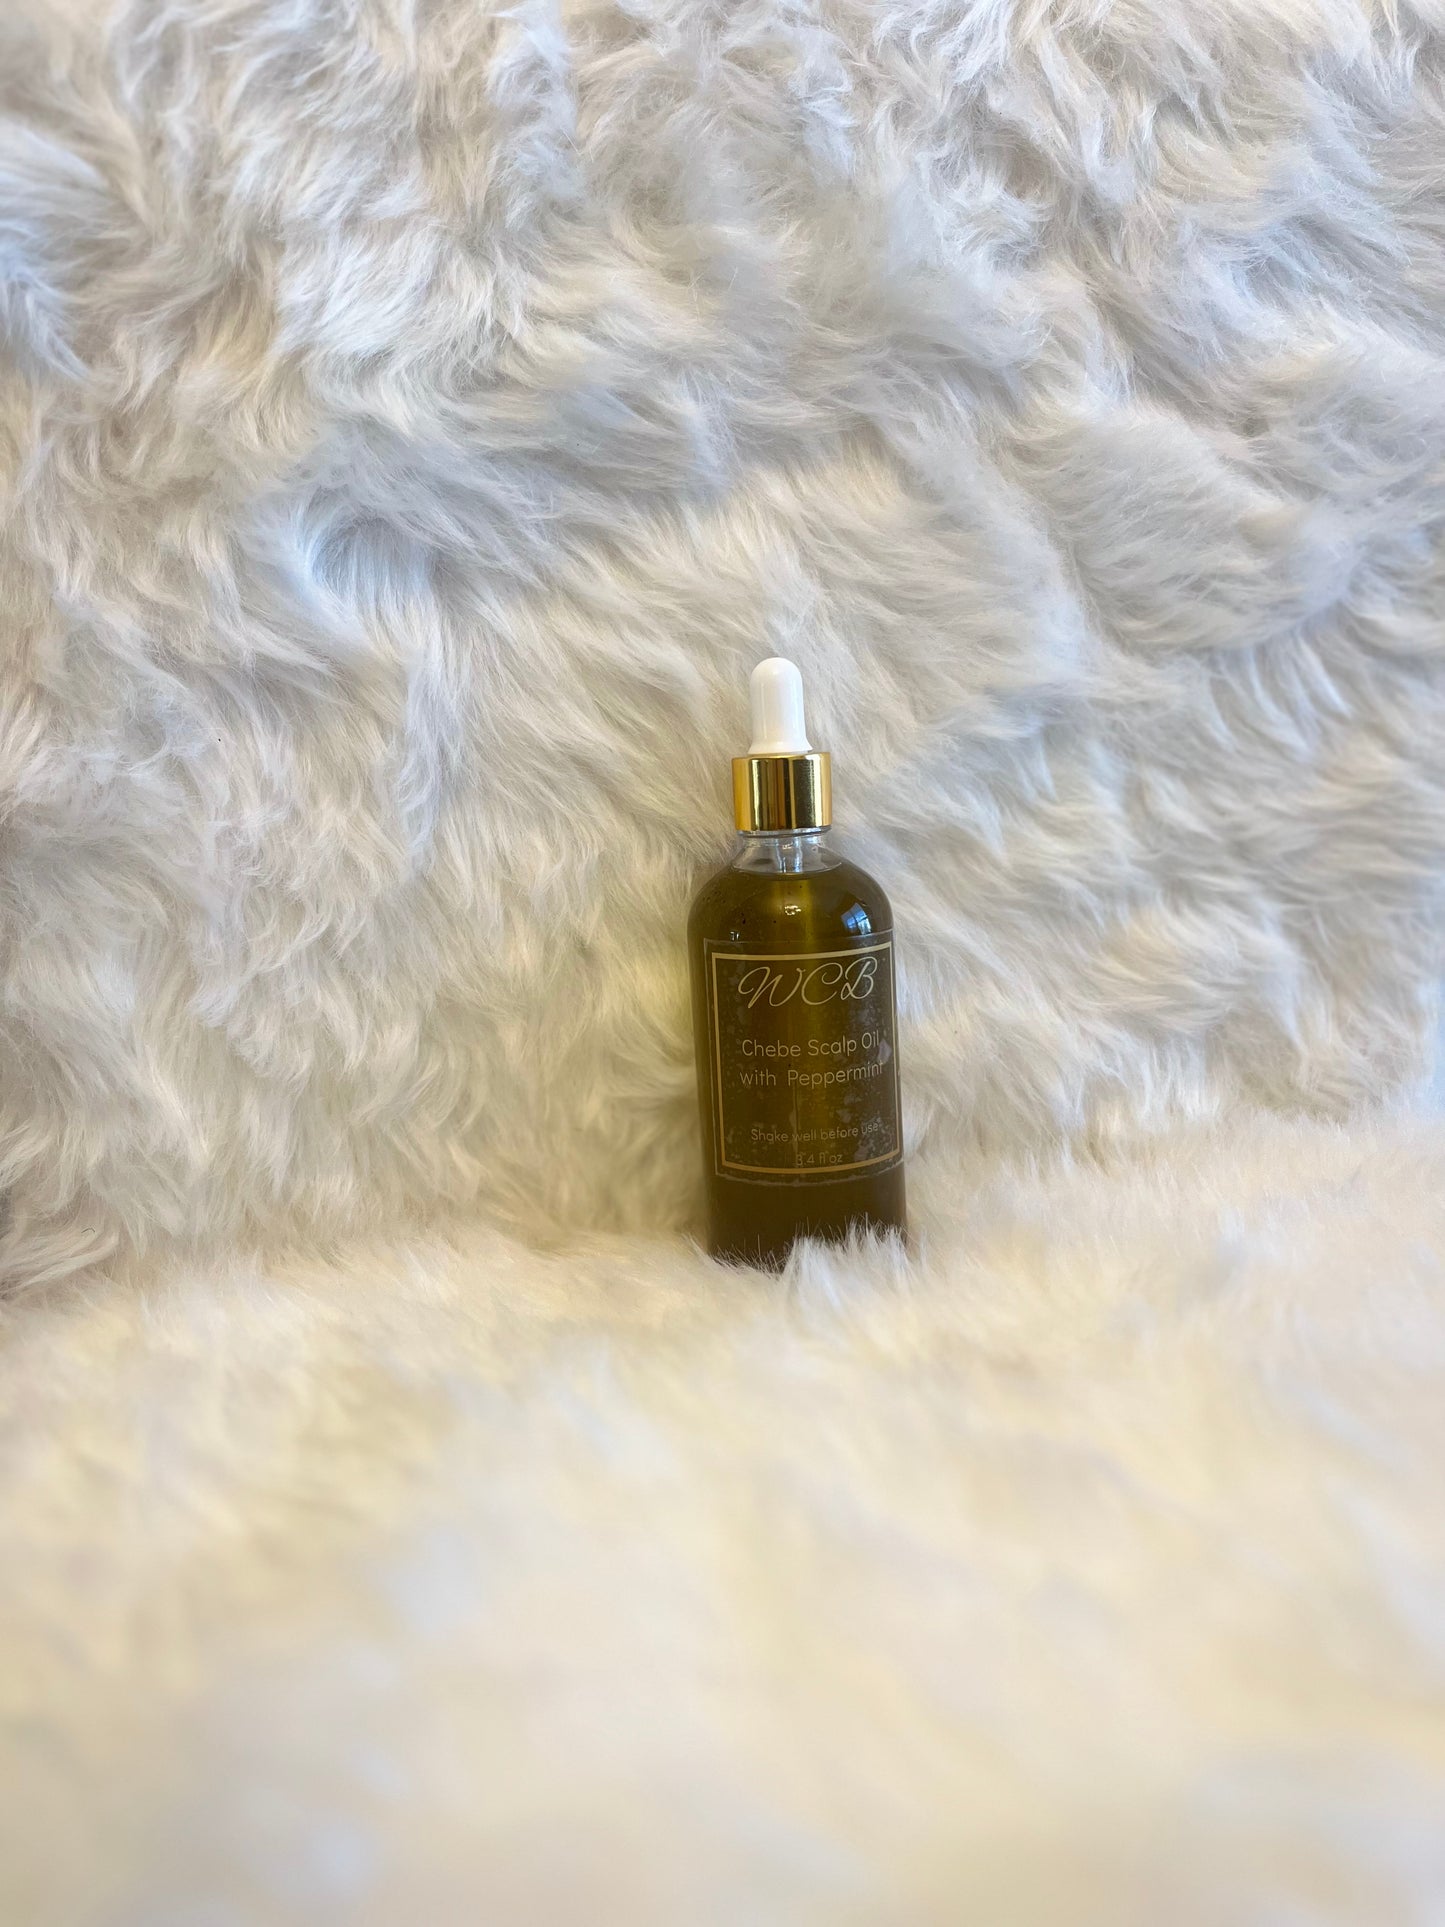 Chebe Scalp Oil with Peppermint